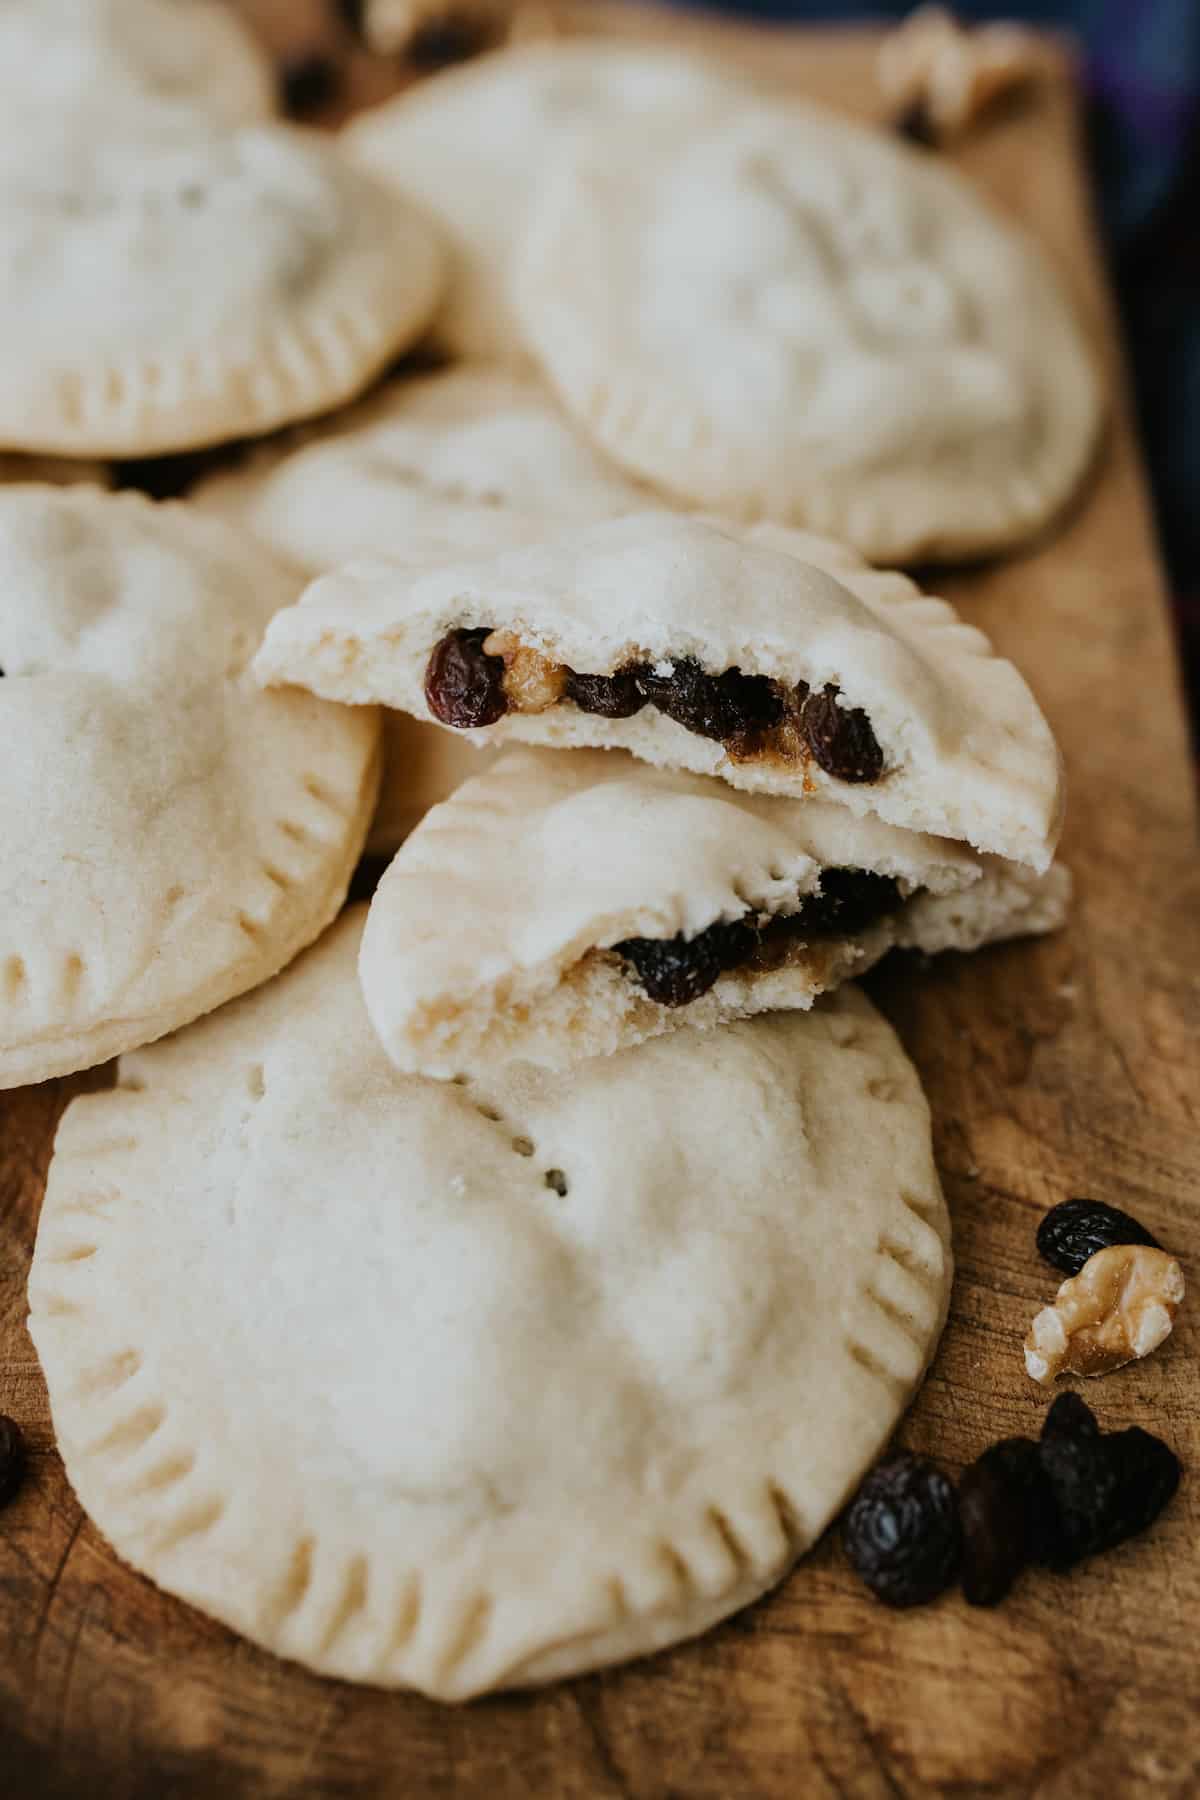 a closeup of a raisin filled cookie sliced in half to show fruit and nut filling on top of other freshly baked raisin filled cookies on a wooden cutting board